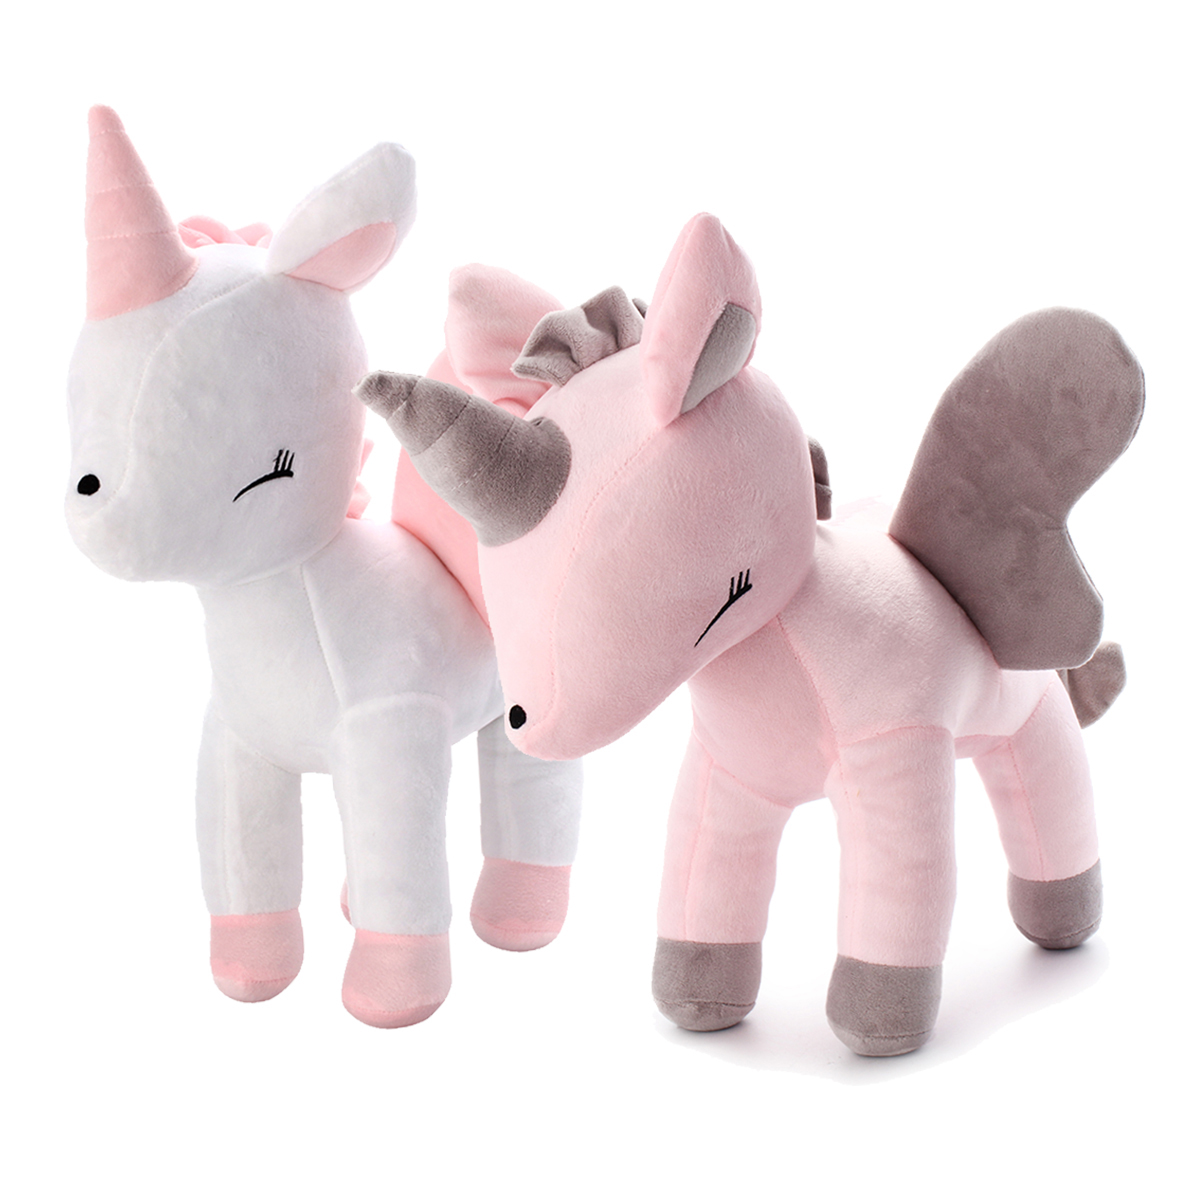 16-Inches-Soft-Giant-Unicorn-Stuffed-Plush-Toy-Animal-Doll-Children-Gifts-Photo-Props-Gift-1299365